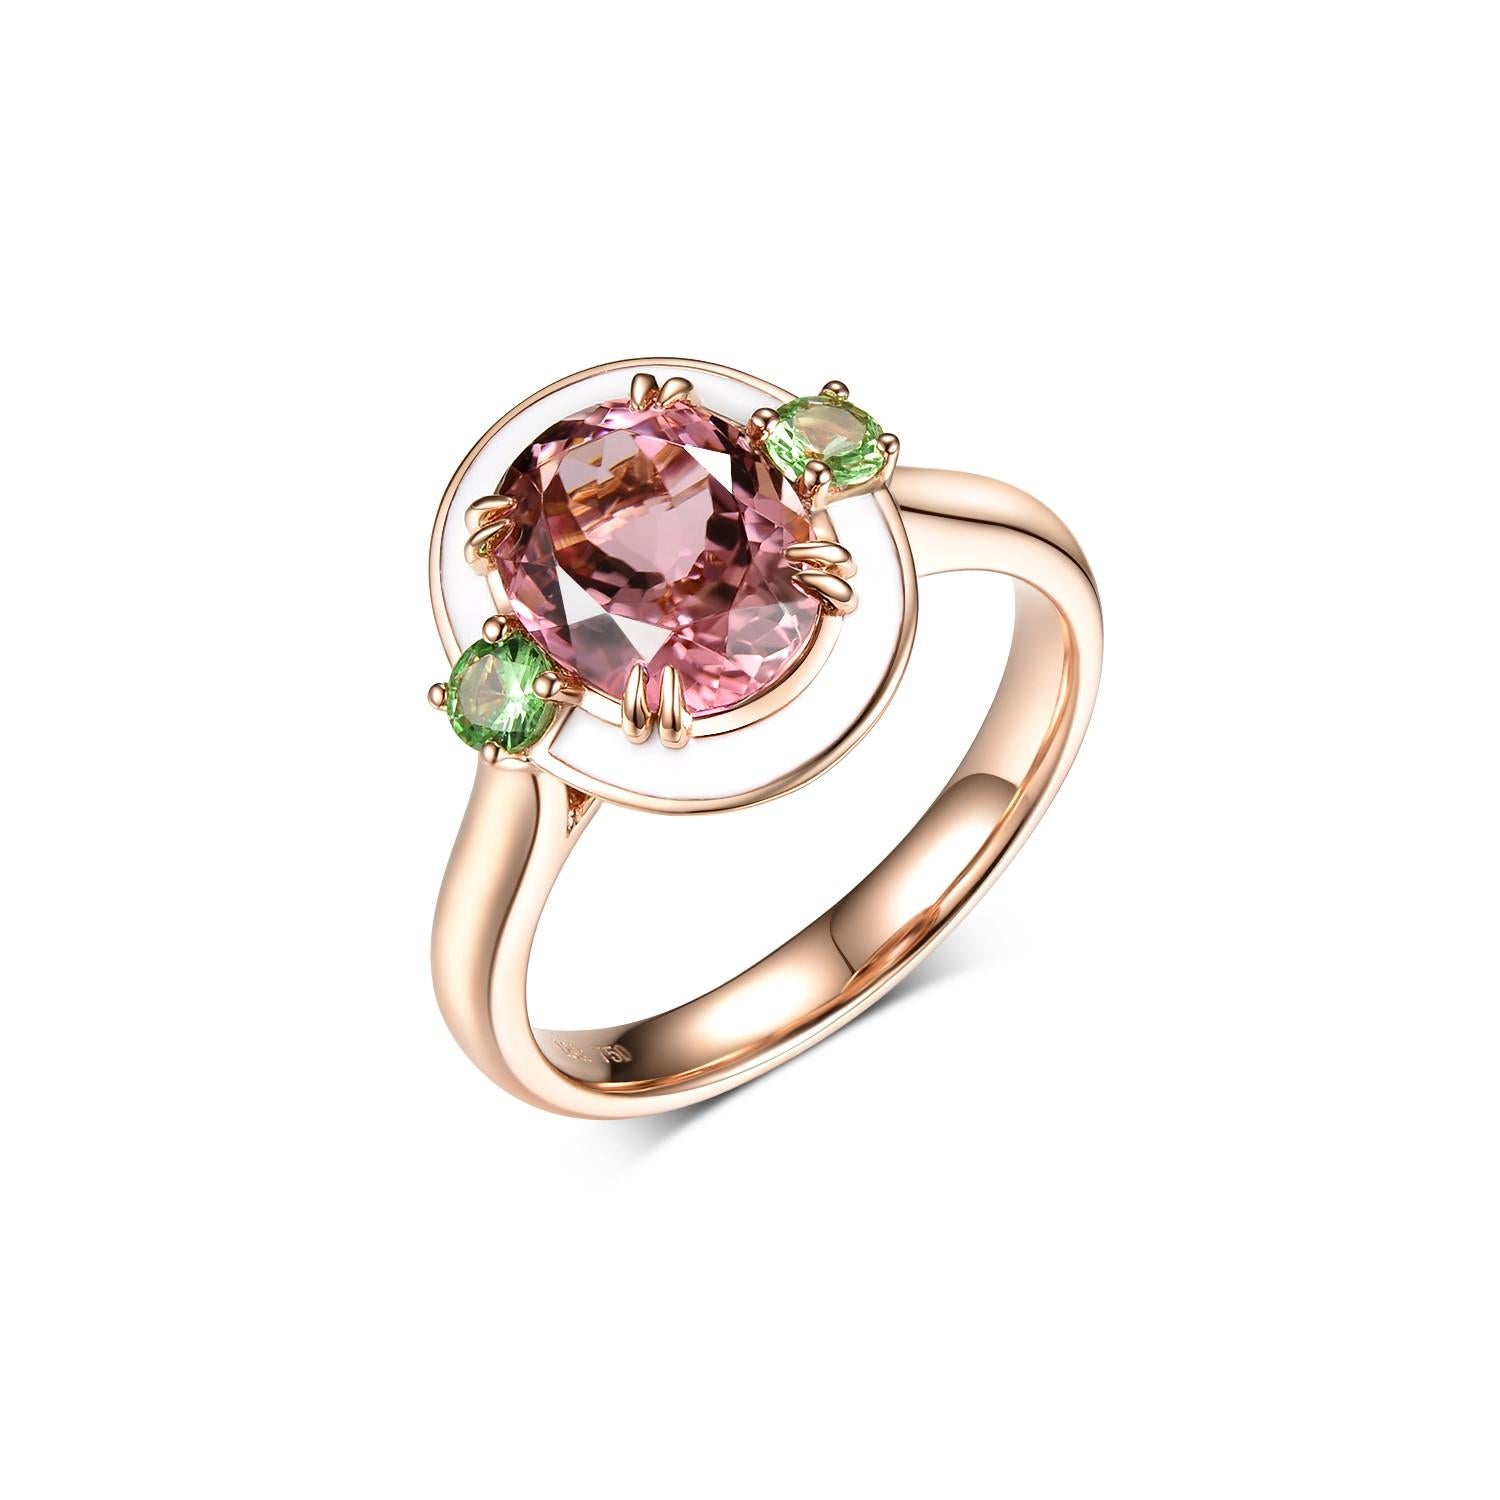 Evoke timeless elegance with this stunning ring, showcasing a radiant 2.16-carat oval cut pink tourmaline at its heart. This captivating gemstone, known for its vibrant hue and rich history, is securely held by double claws on each of its corners,